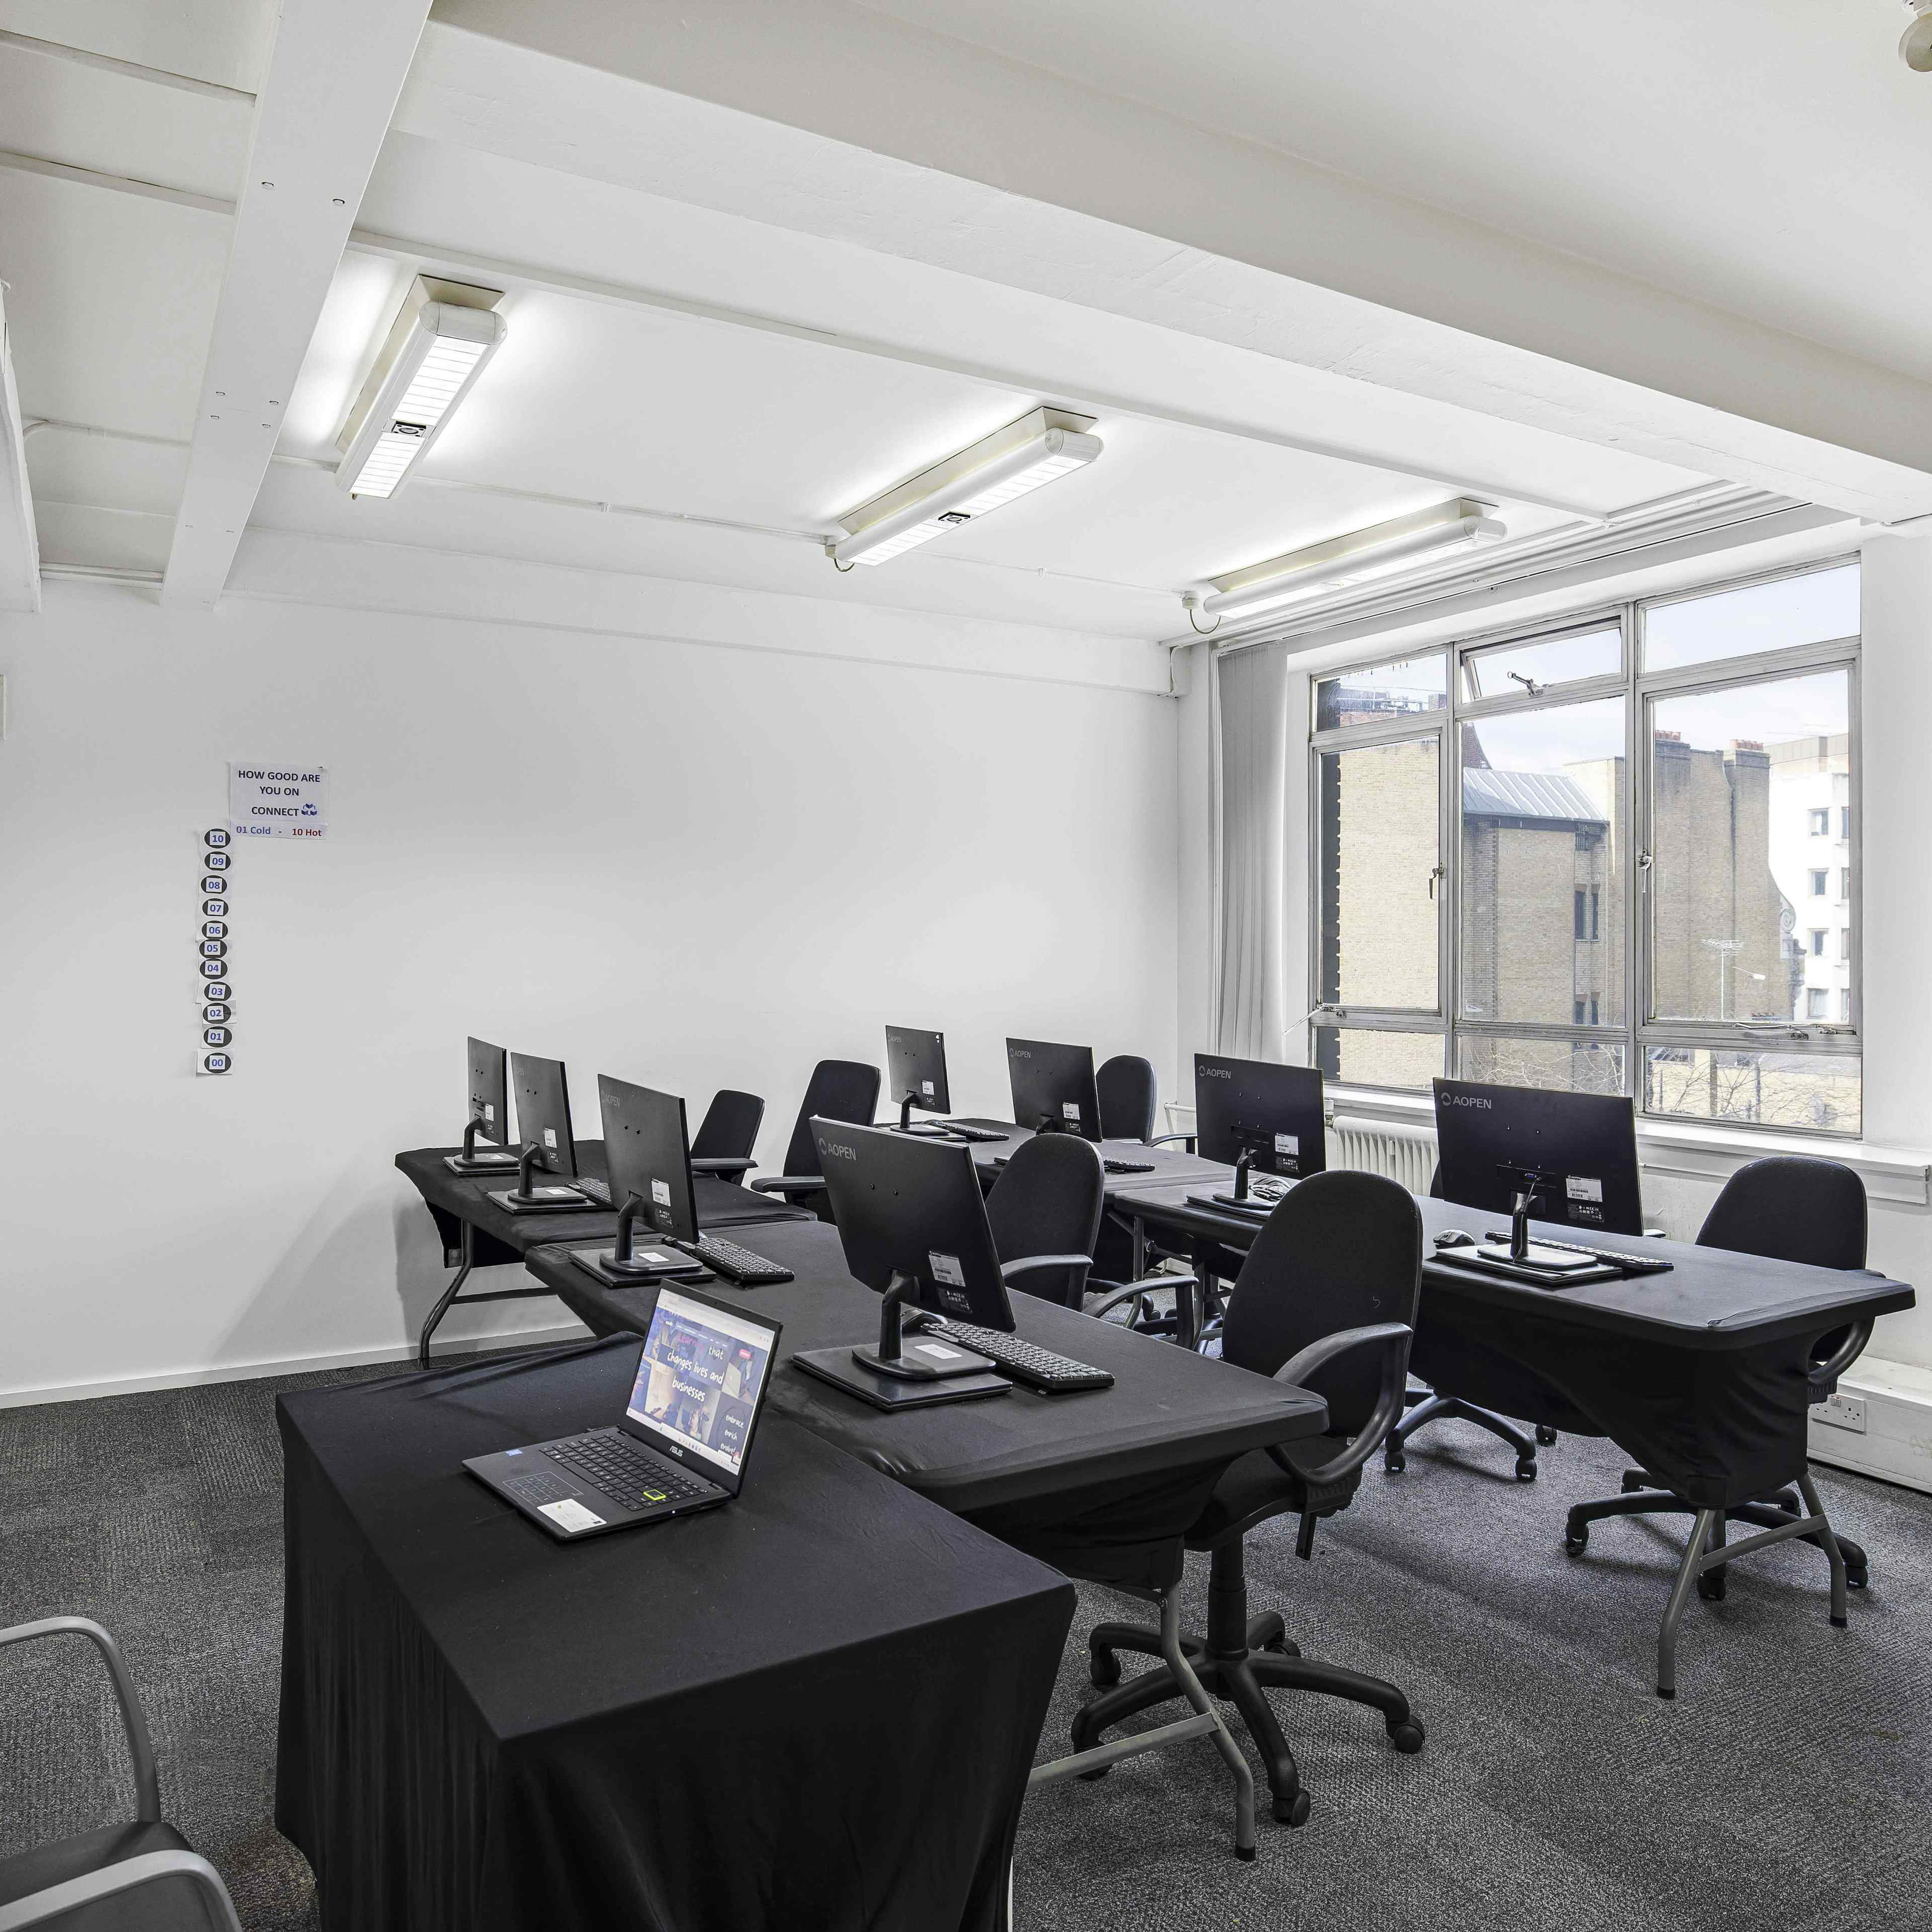 55 Broadway IT Training Rooms - IT Training Rooms image 3